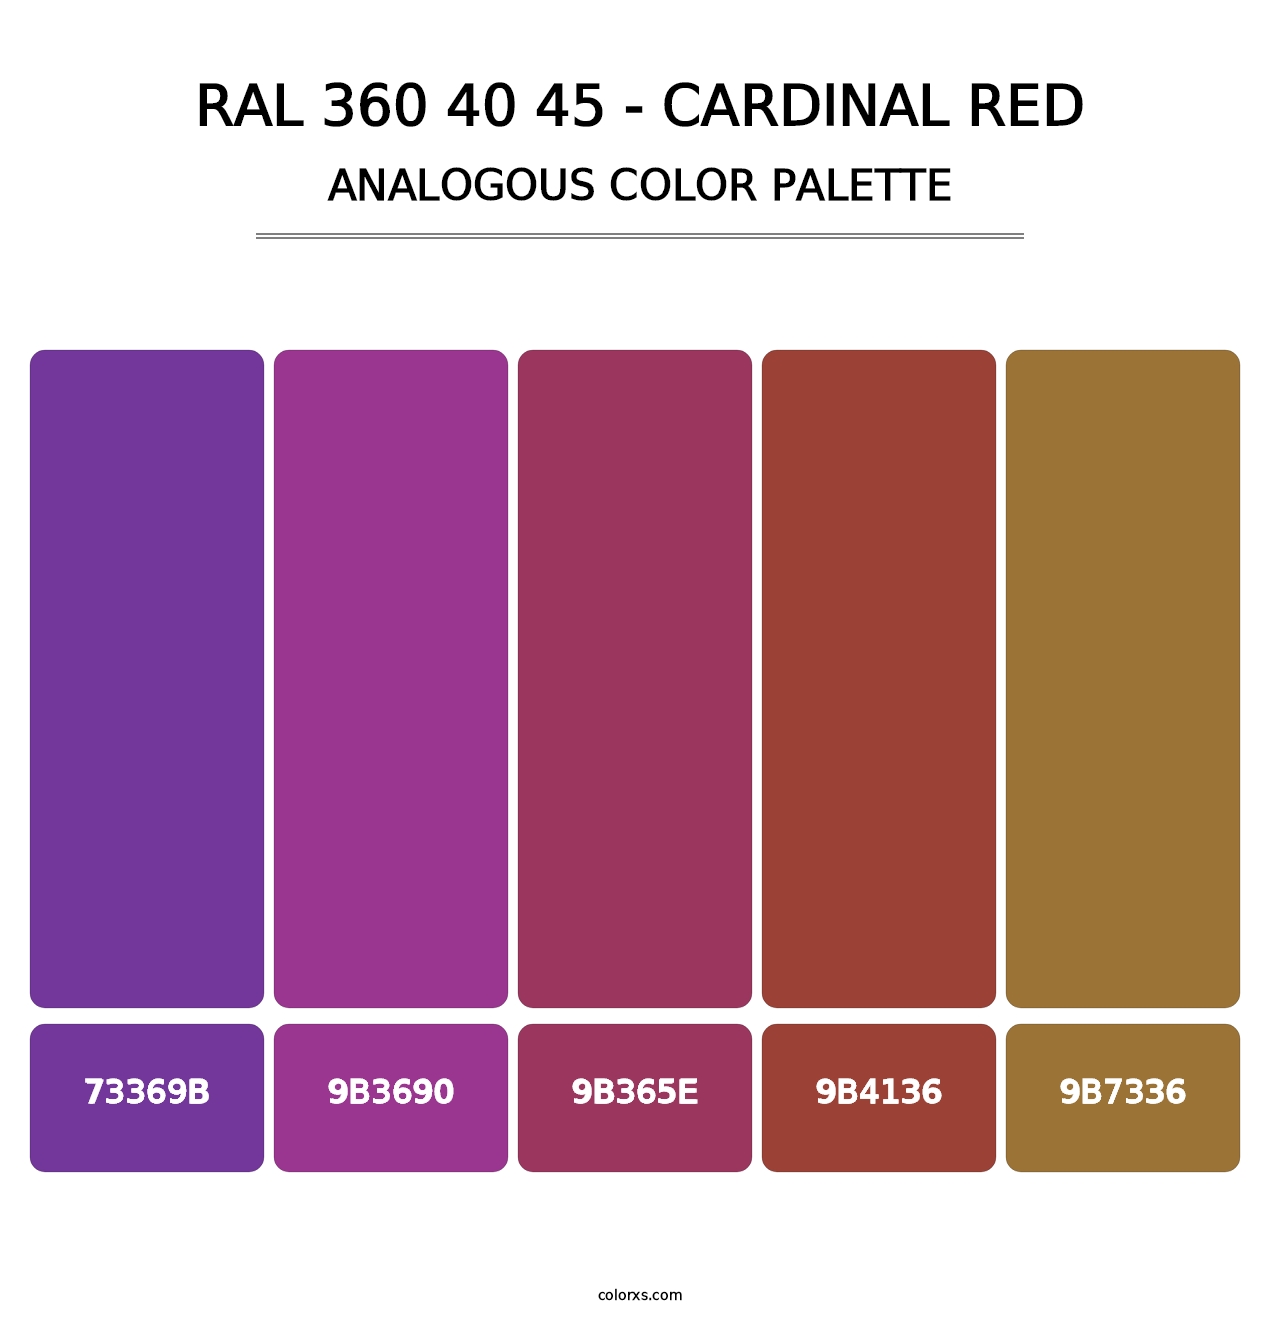 RAL 360 40 45 - Cardinal Red - Analogous Color Palette